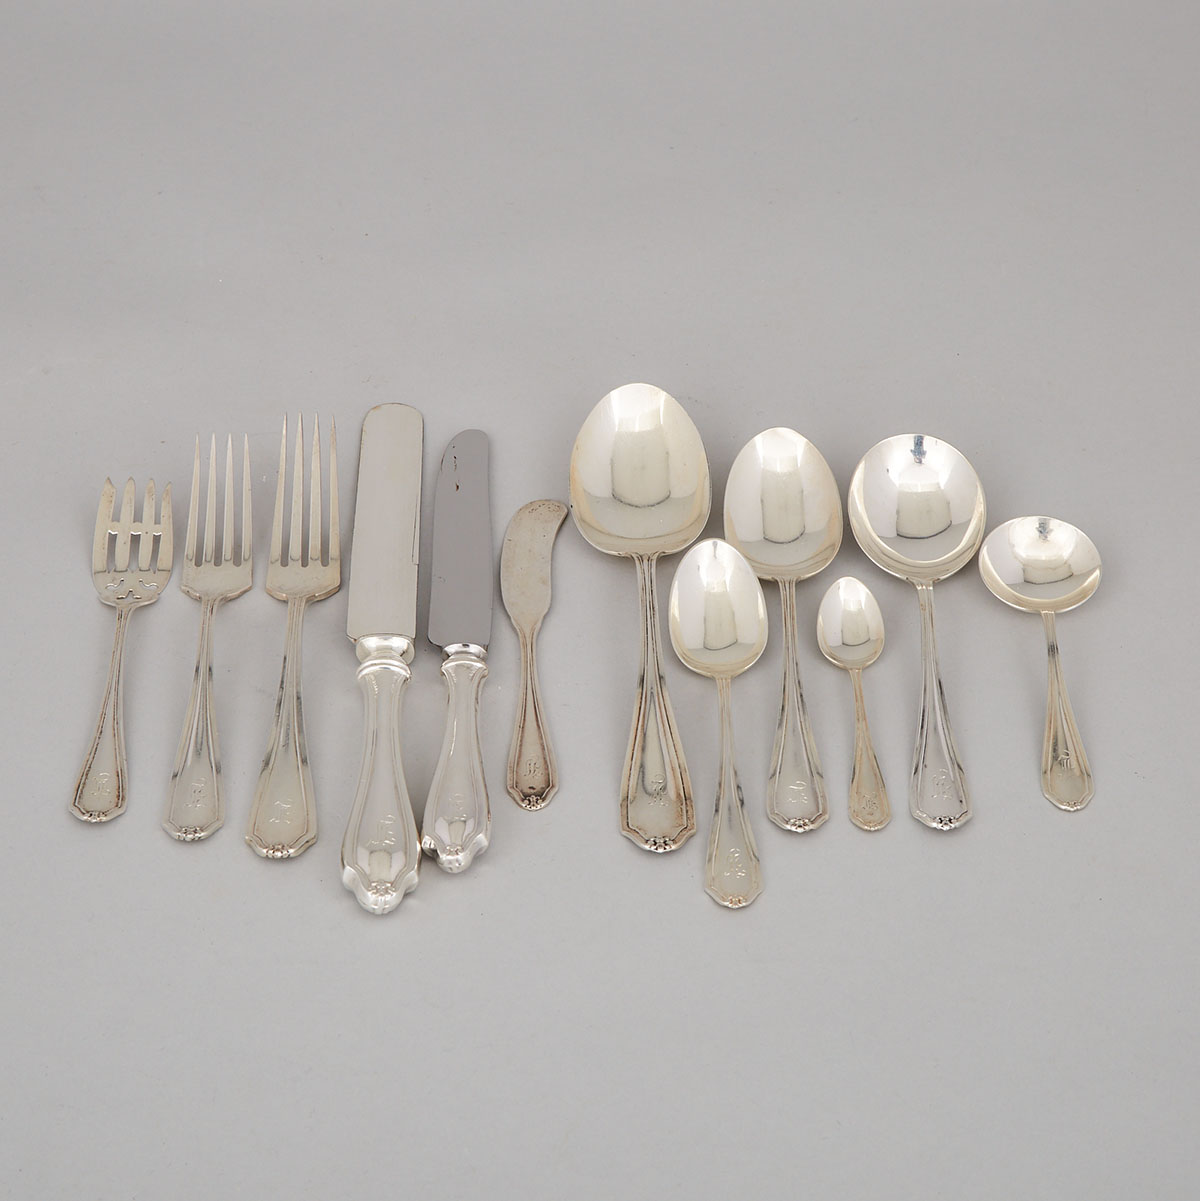 Canadian Silver Flatware and Tea Service, Ryrie Bros., Toronto, Ont., early 20th century